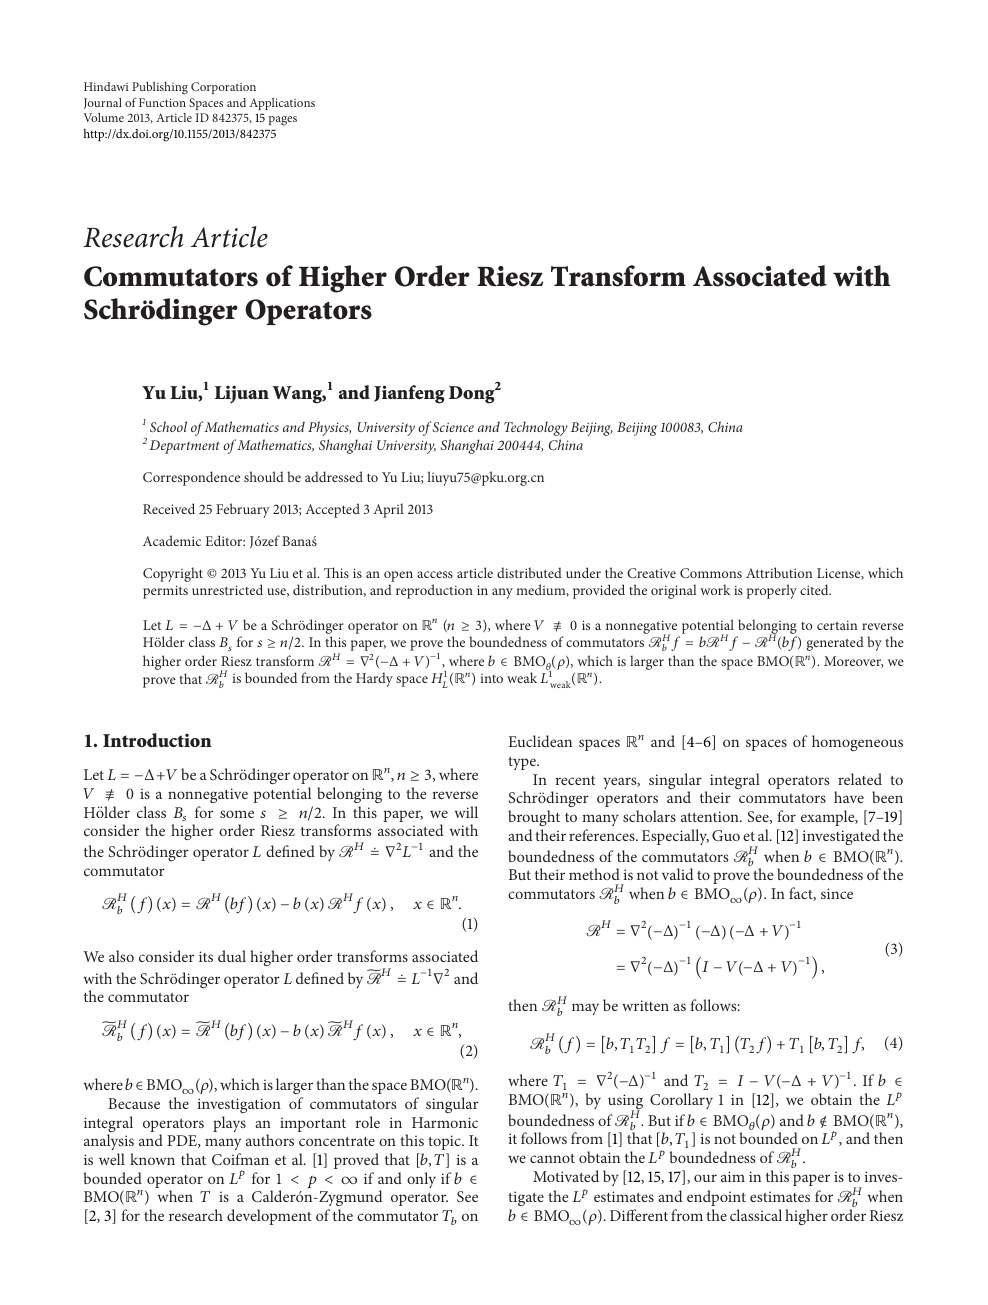 Commutators Of Higher Order Riesz Transform Associated With Schrodinger Operators Topic Of Research Paper In Mathematics Download Scholarly Article Pdf And Read For Free On Cyberleninka Open Science Hub